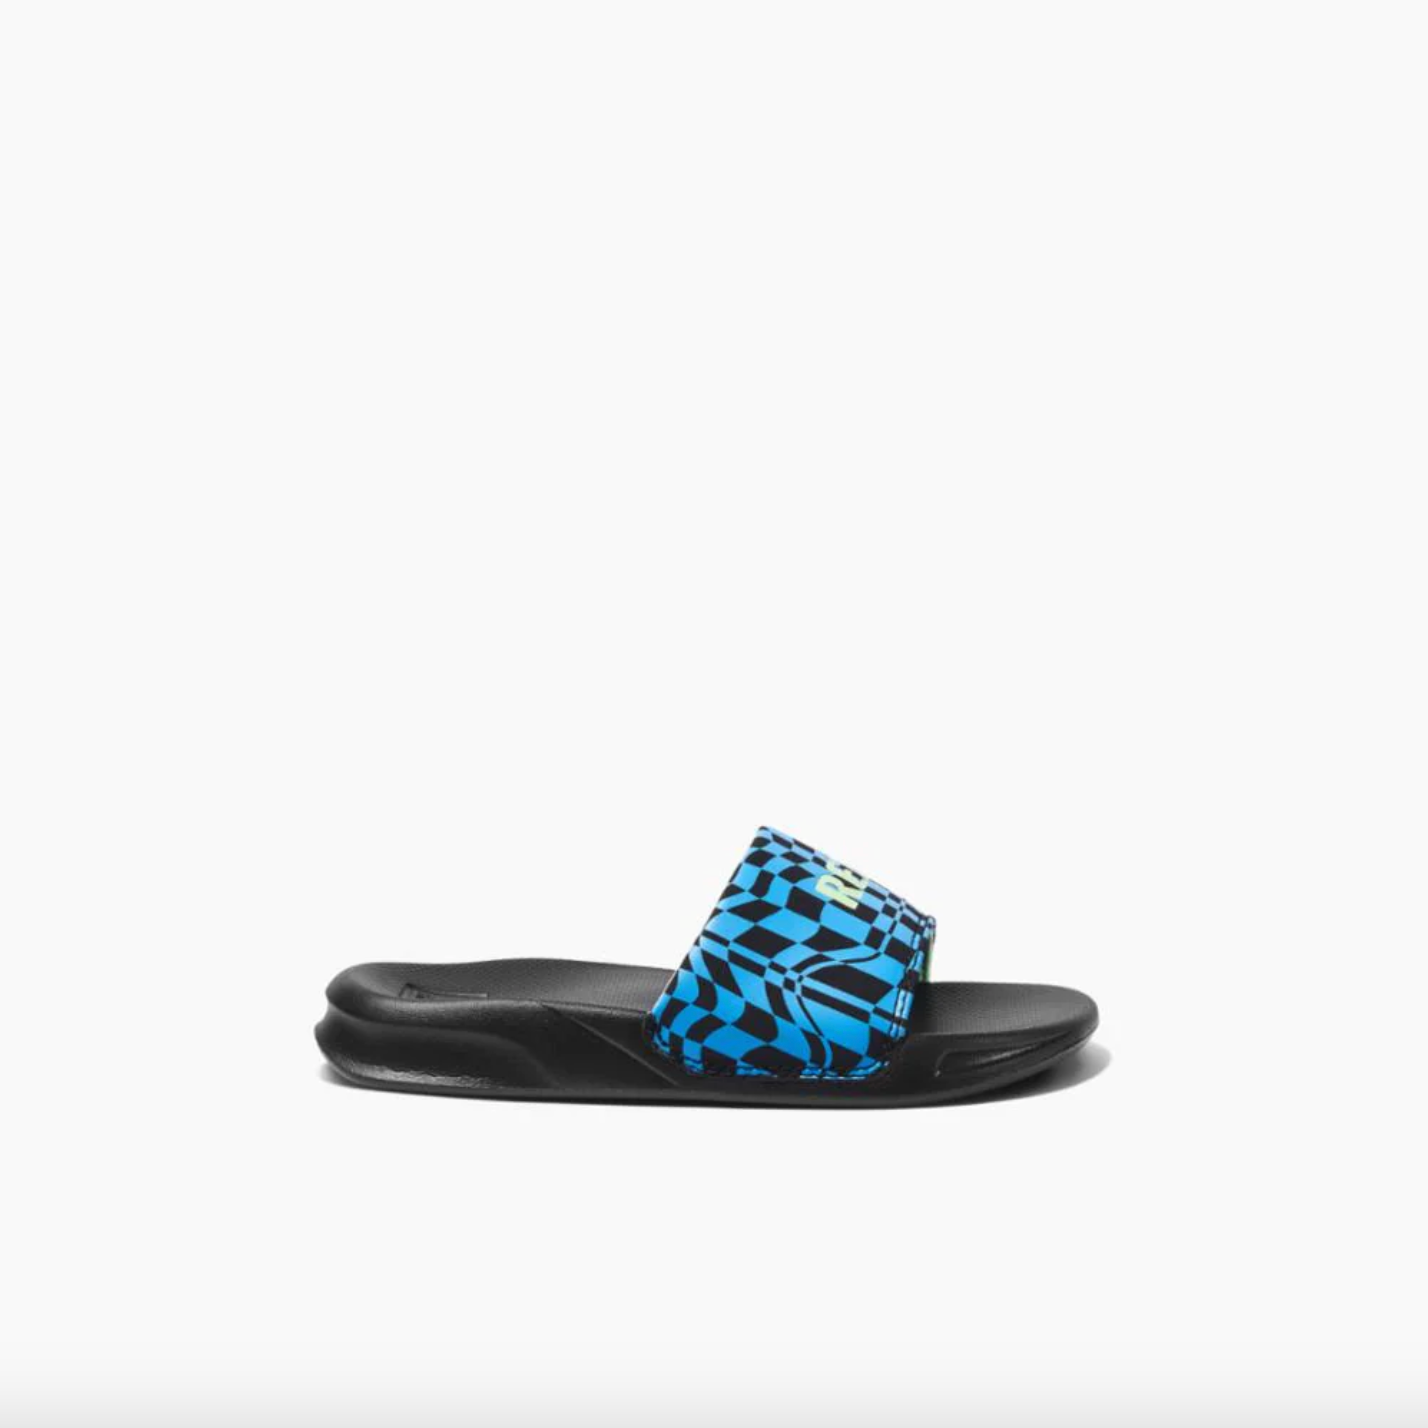 Reef Kids One Slide Sandals - Swell Checkers